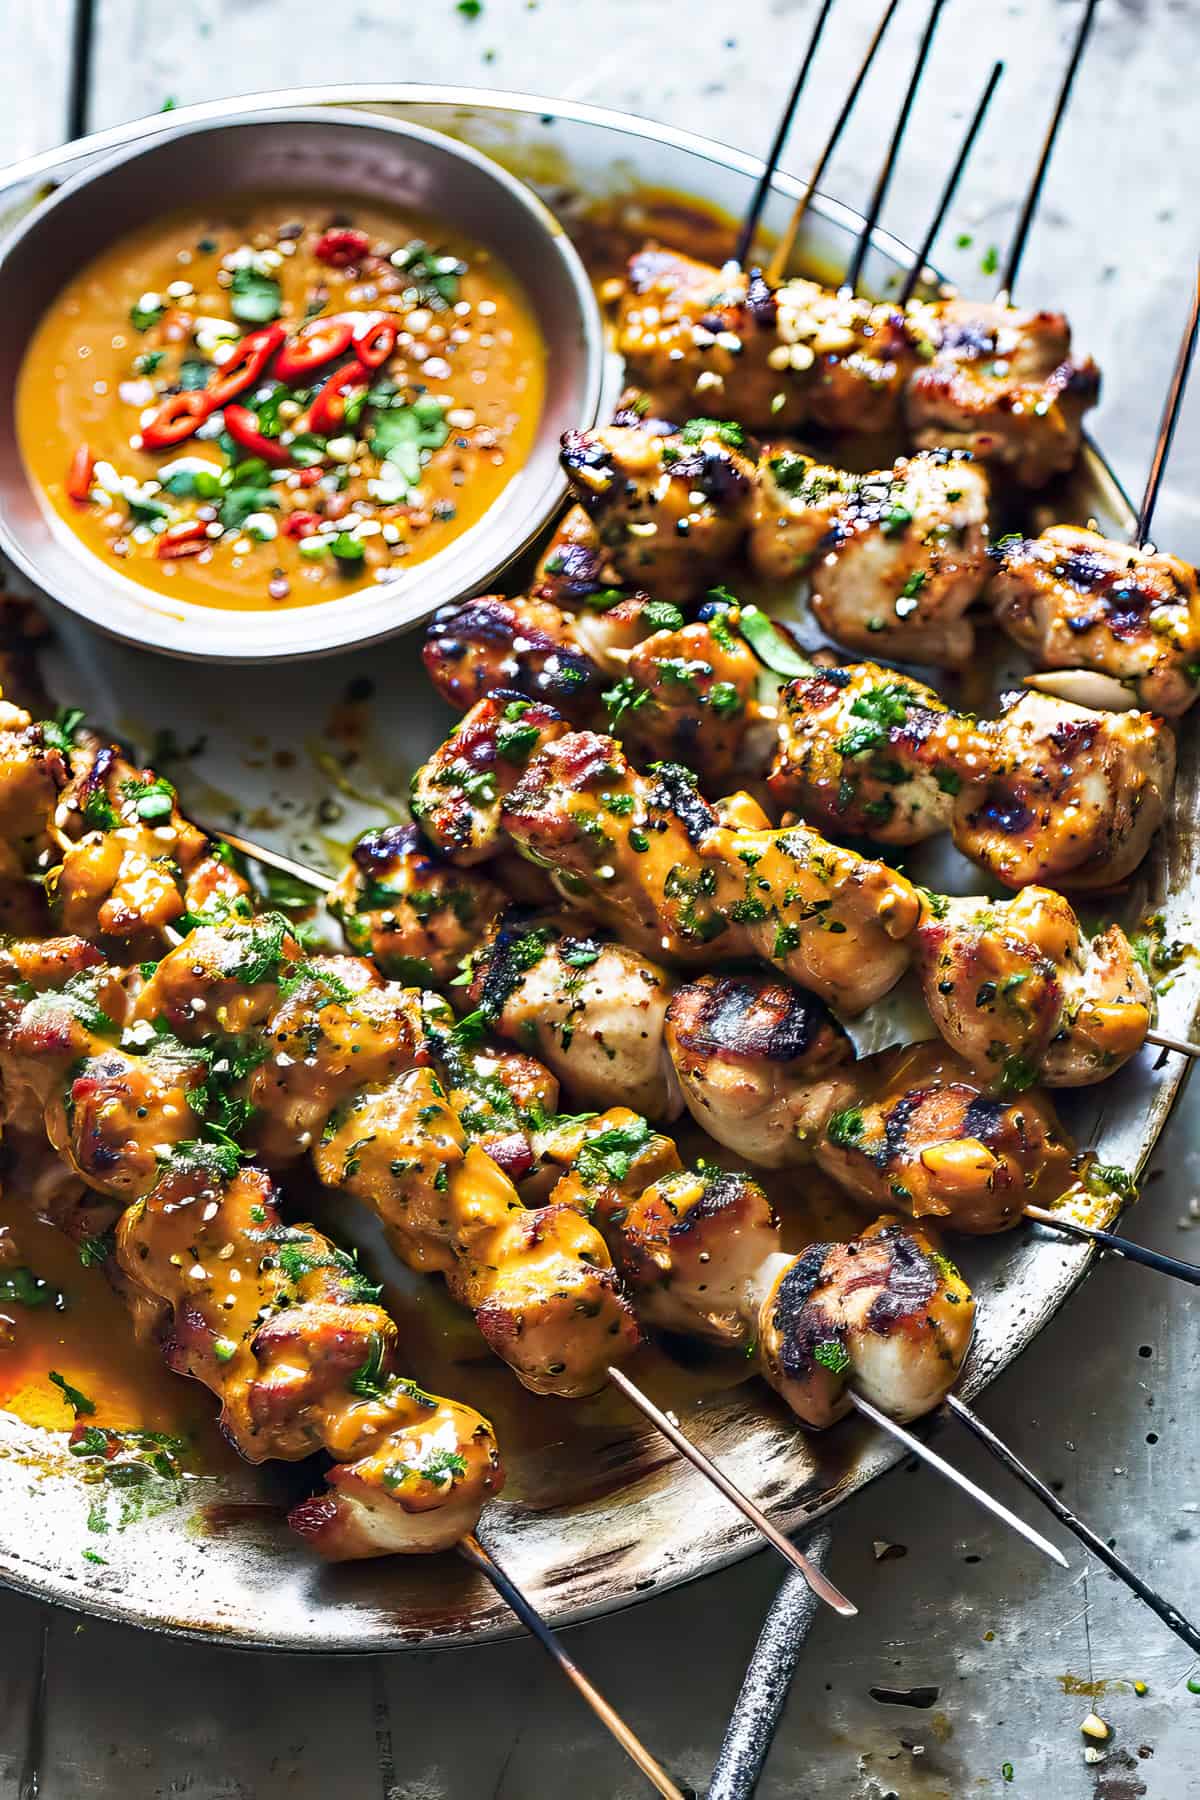 Thai grilled chicken skewers with peanut sauce and cilantro on a plate.